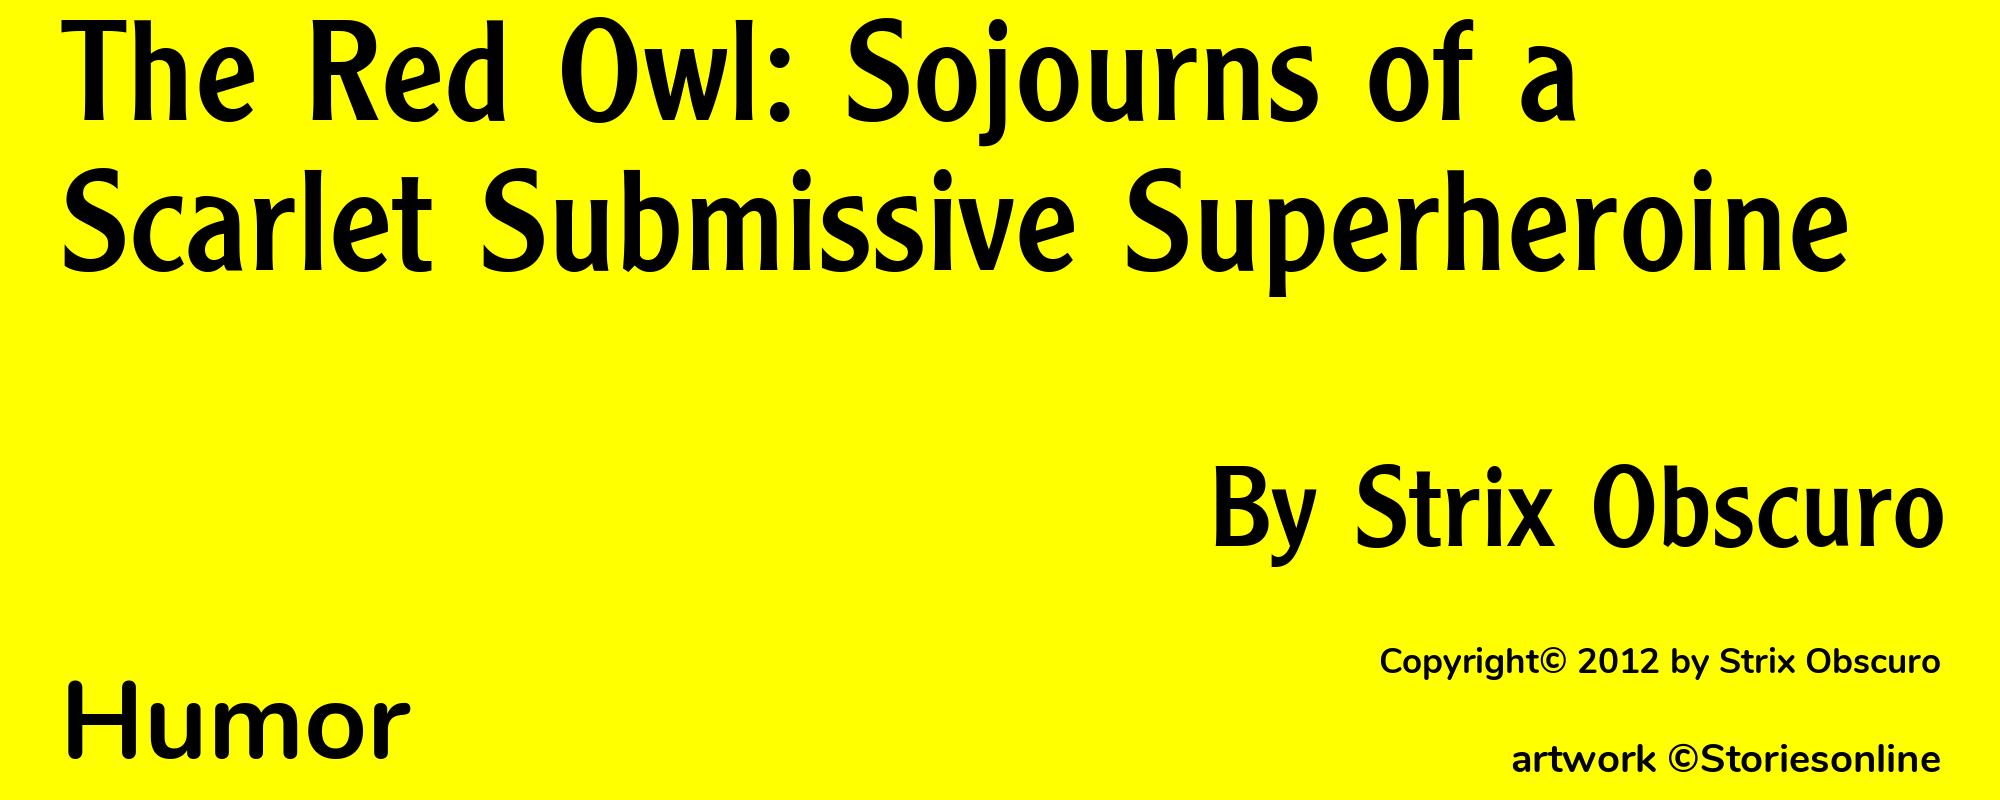 The Red Owl: Sojourns of a Scarlet Submissive Superheroine - Cover